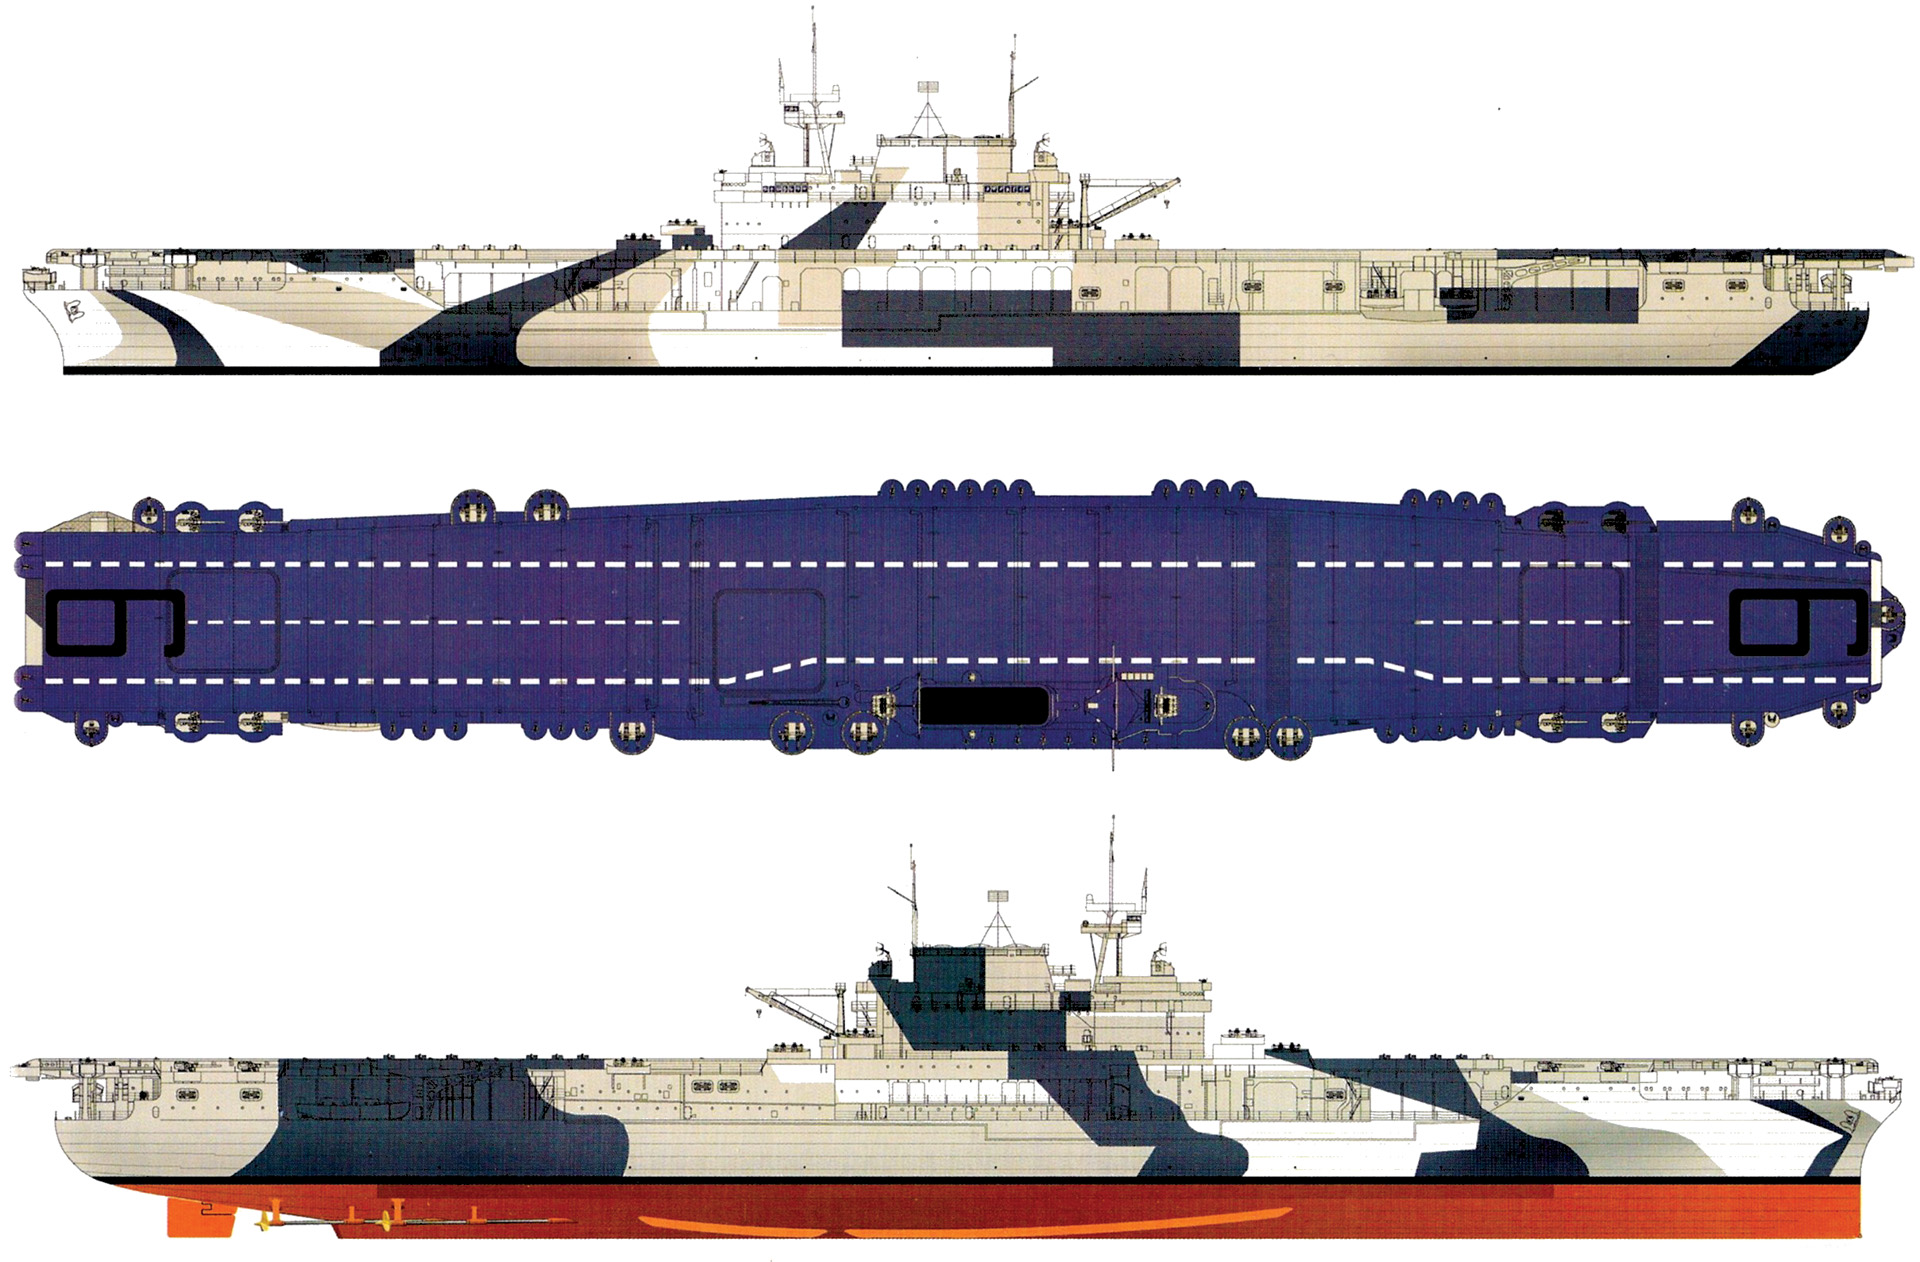 The carrier USS Enterprise (CV-6) was painted in a dazzle pattern in 1944. 